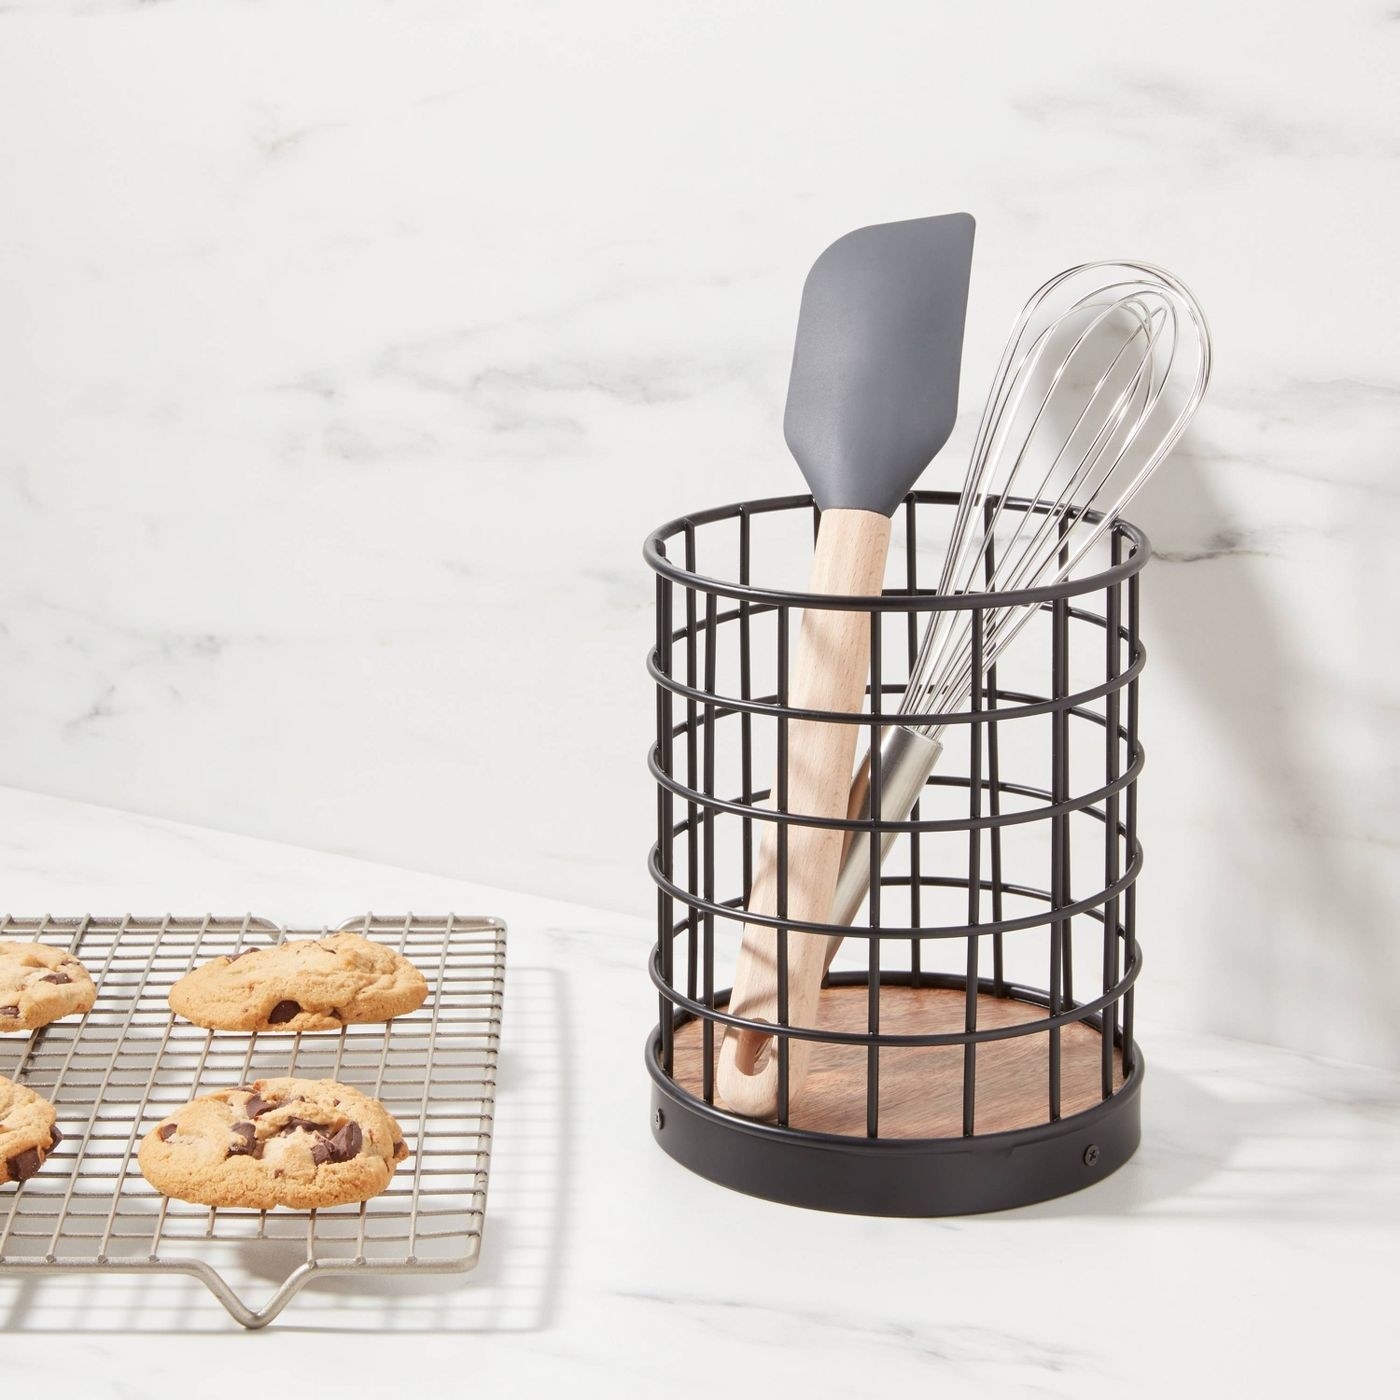 The utensil holder with a whisk and spatula